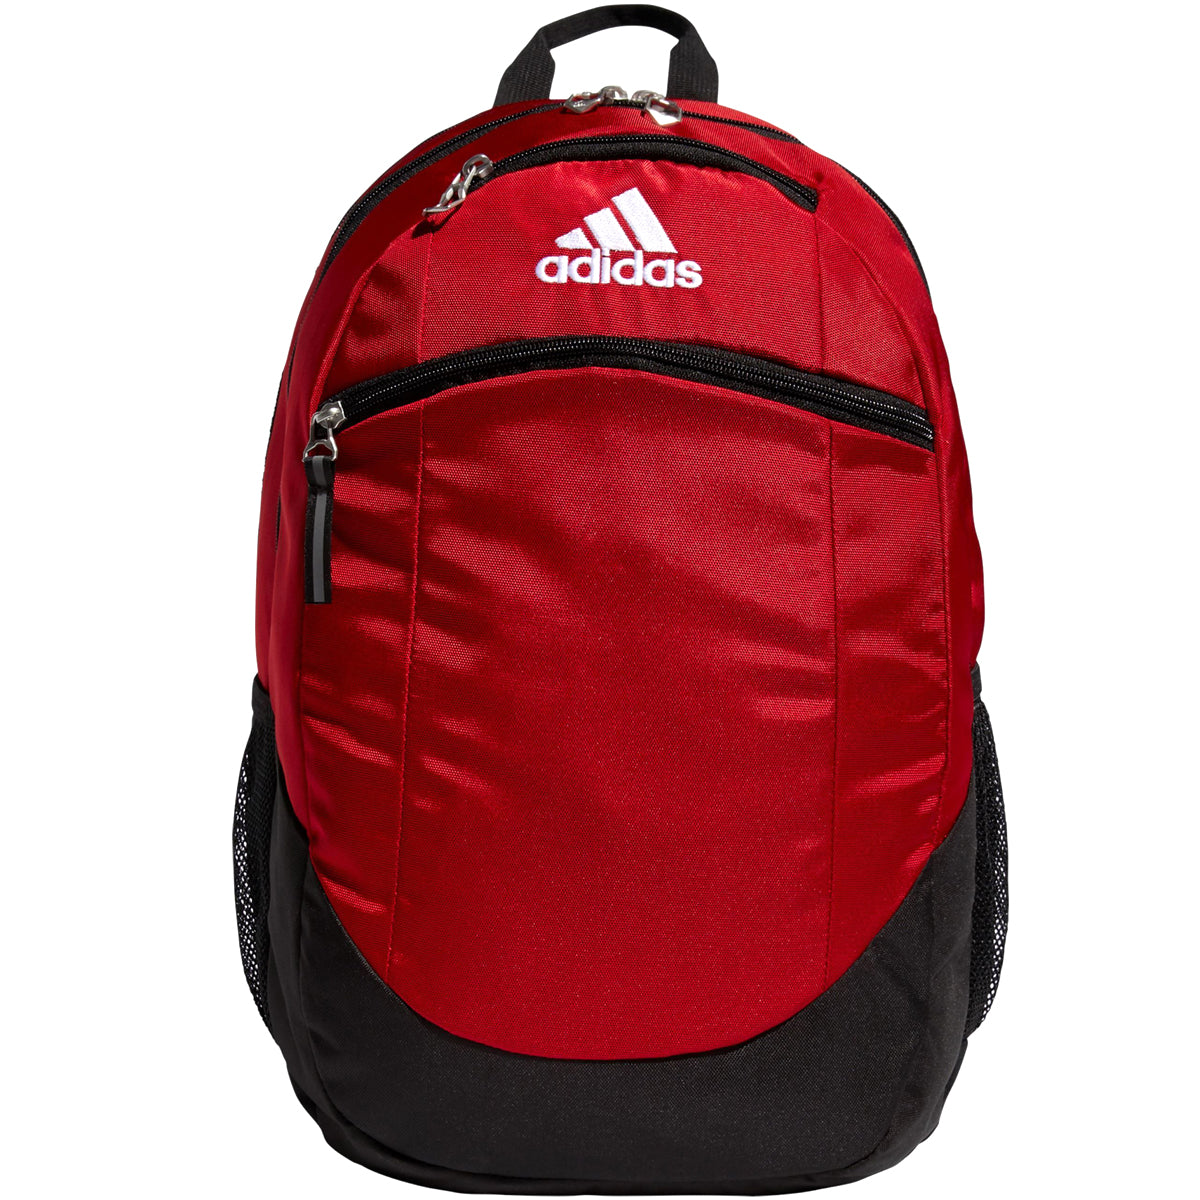 adidas Striker II Team Backpack Bags Adidas One Size Power Red 